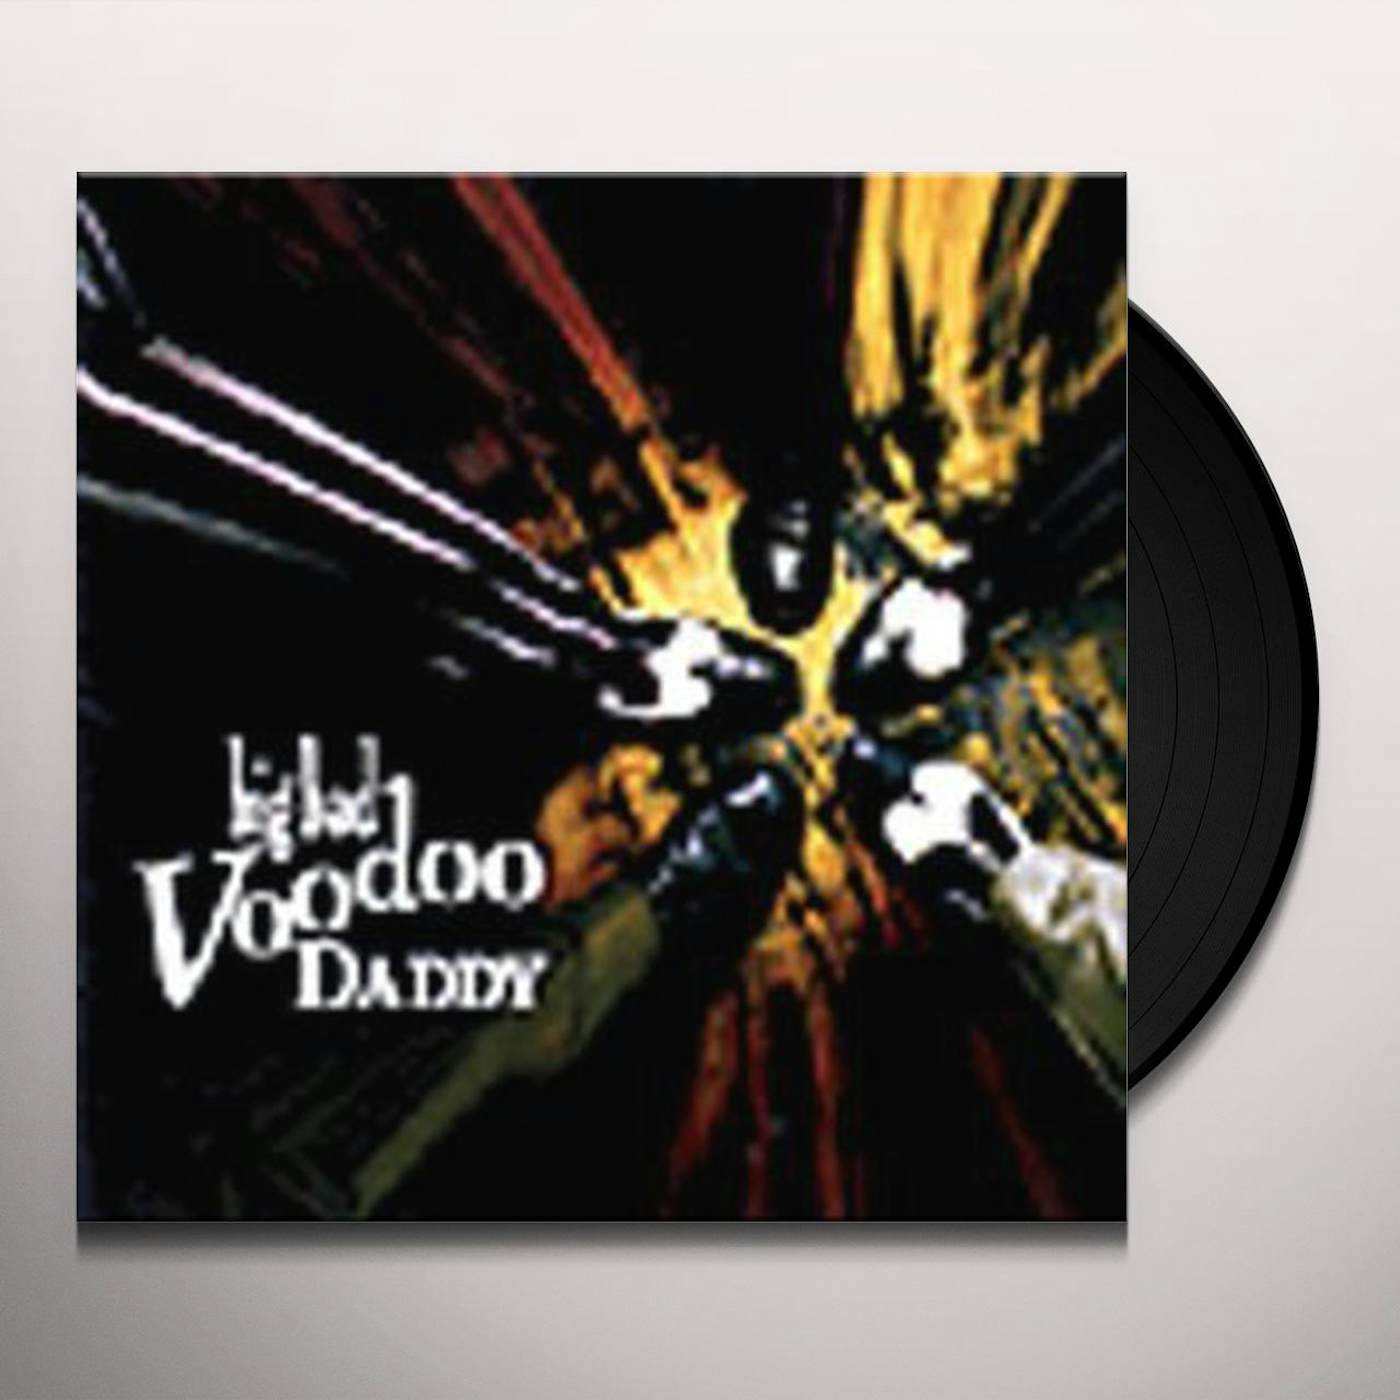 Big Bad Voodoo Daddy Everything You Want For Christmas Vinyl $39.99